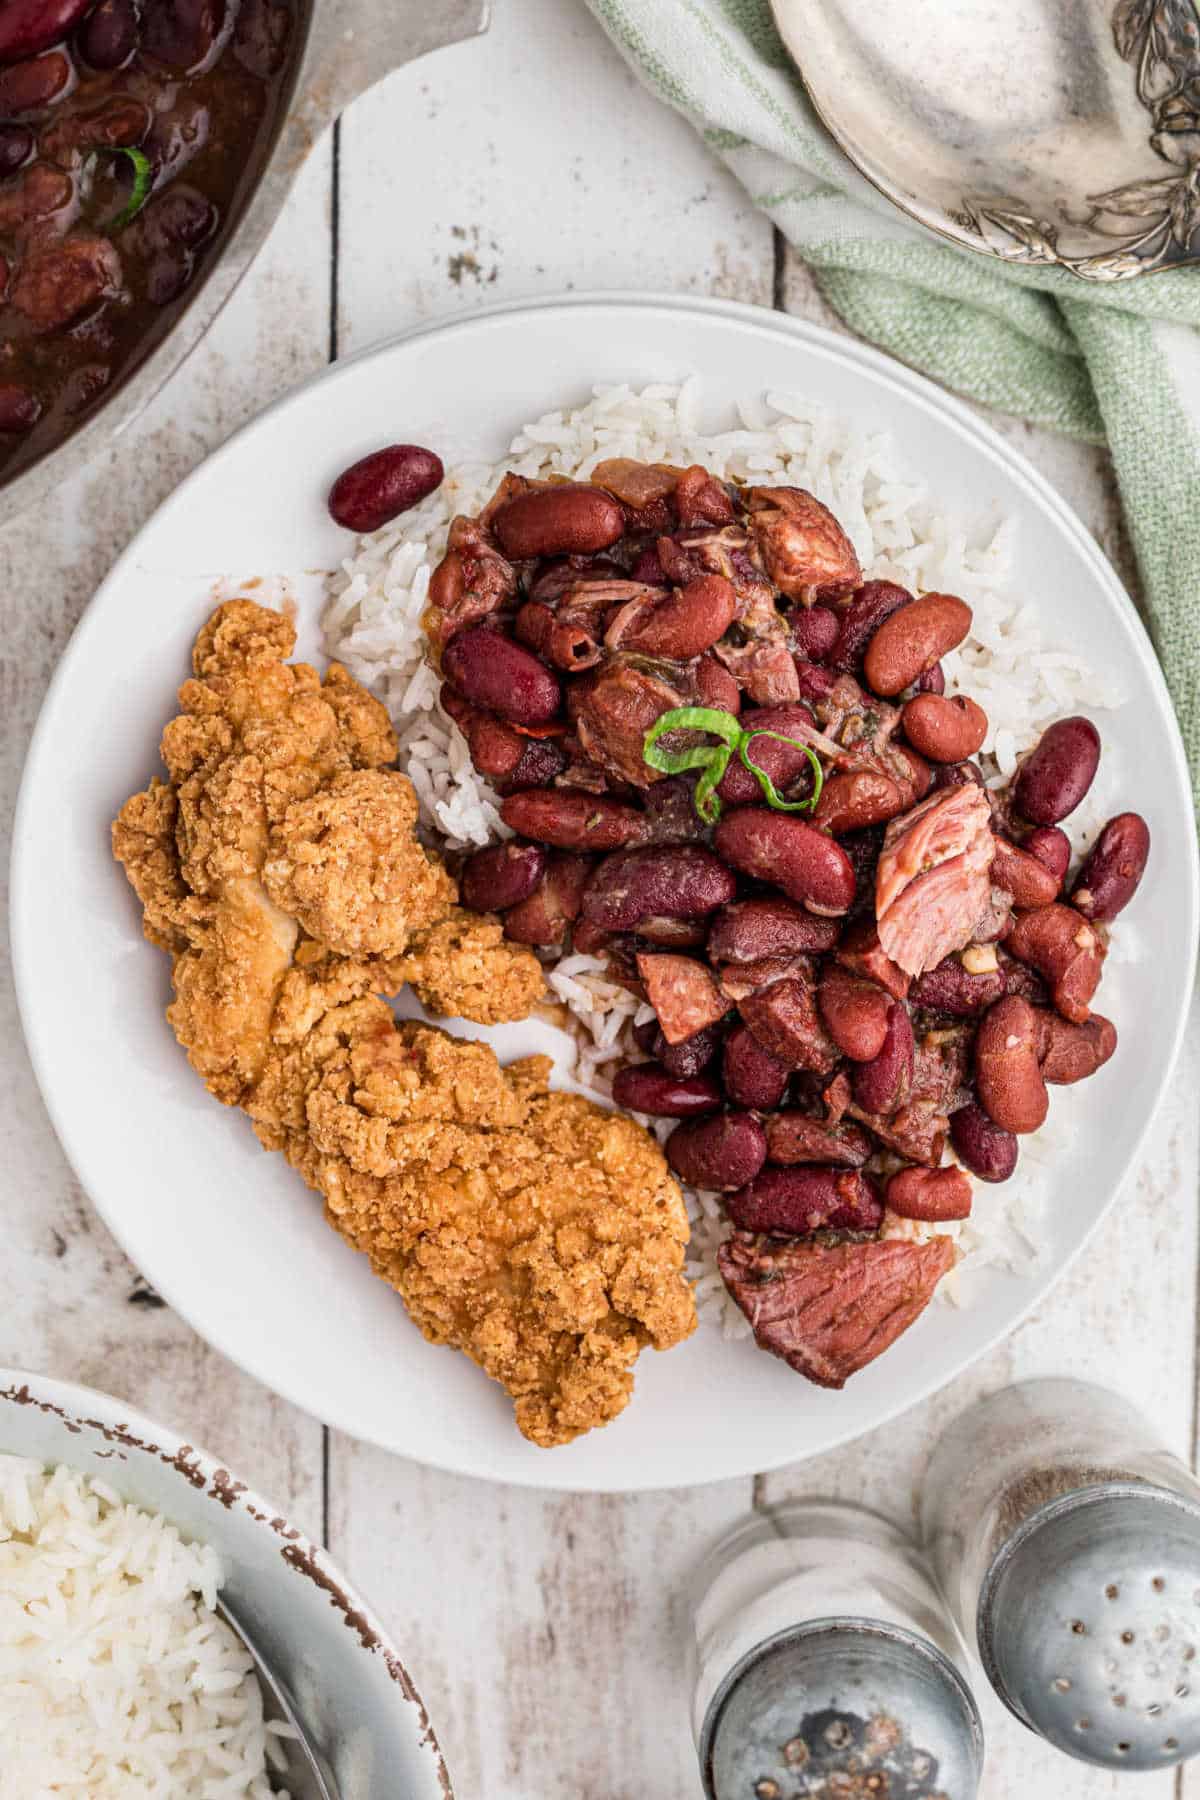 A dished up plate of fried chicken and red beans and rice with ham hocks.